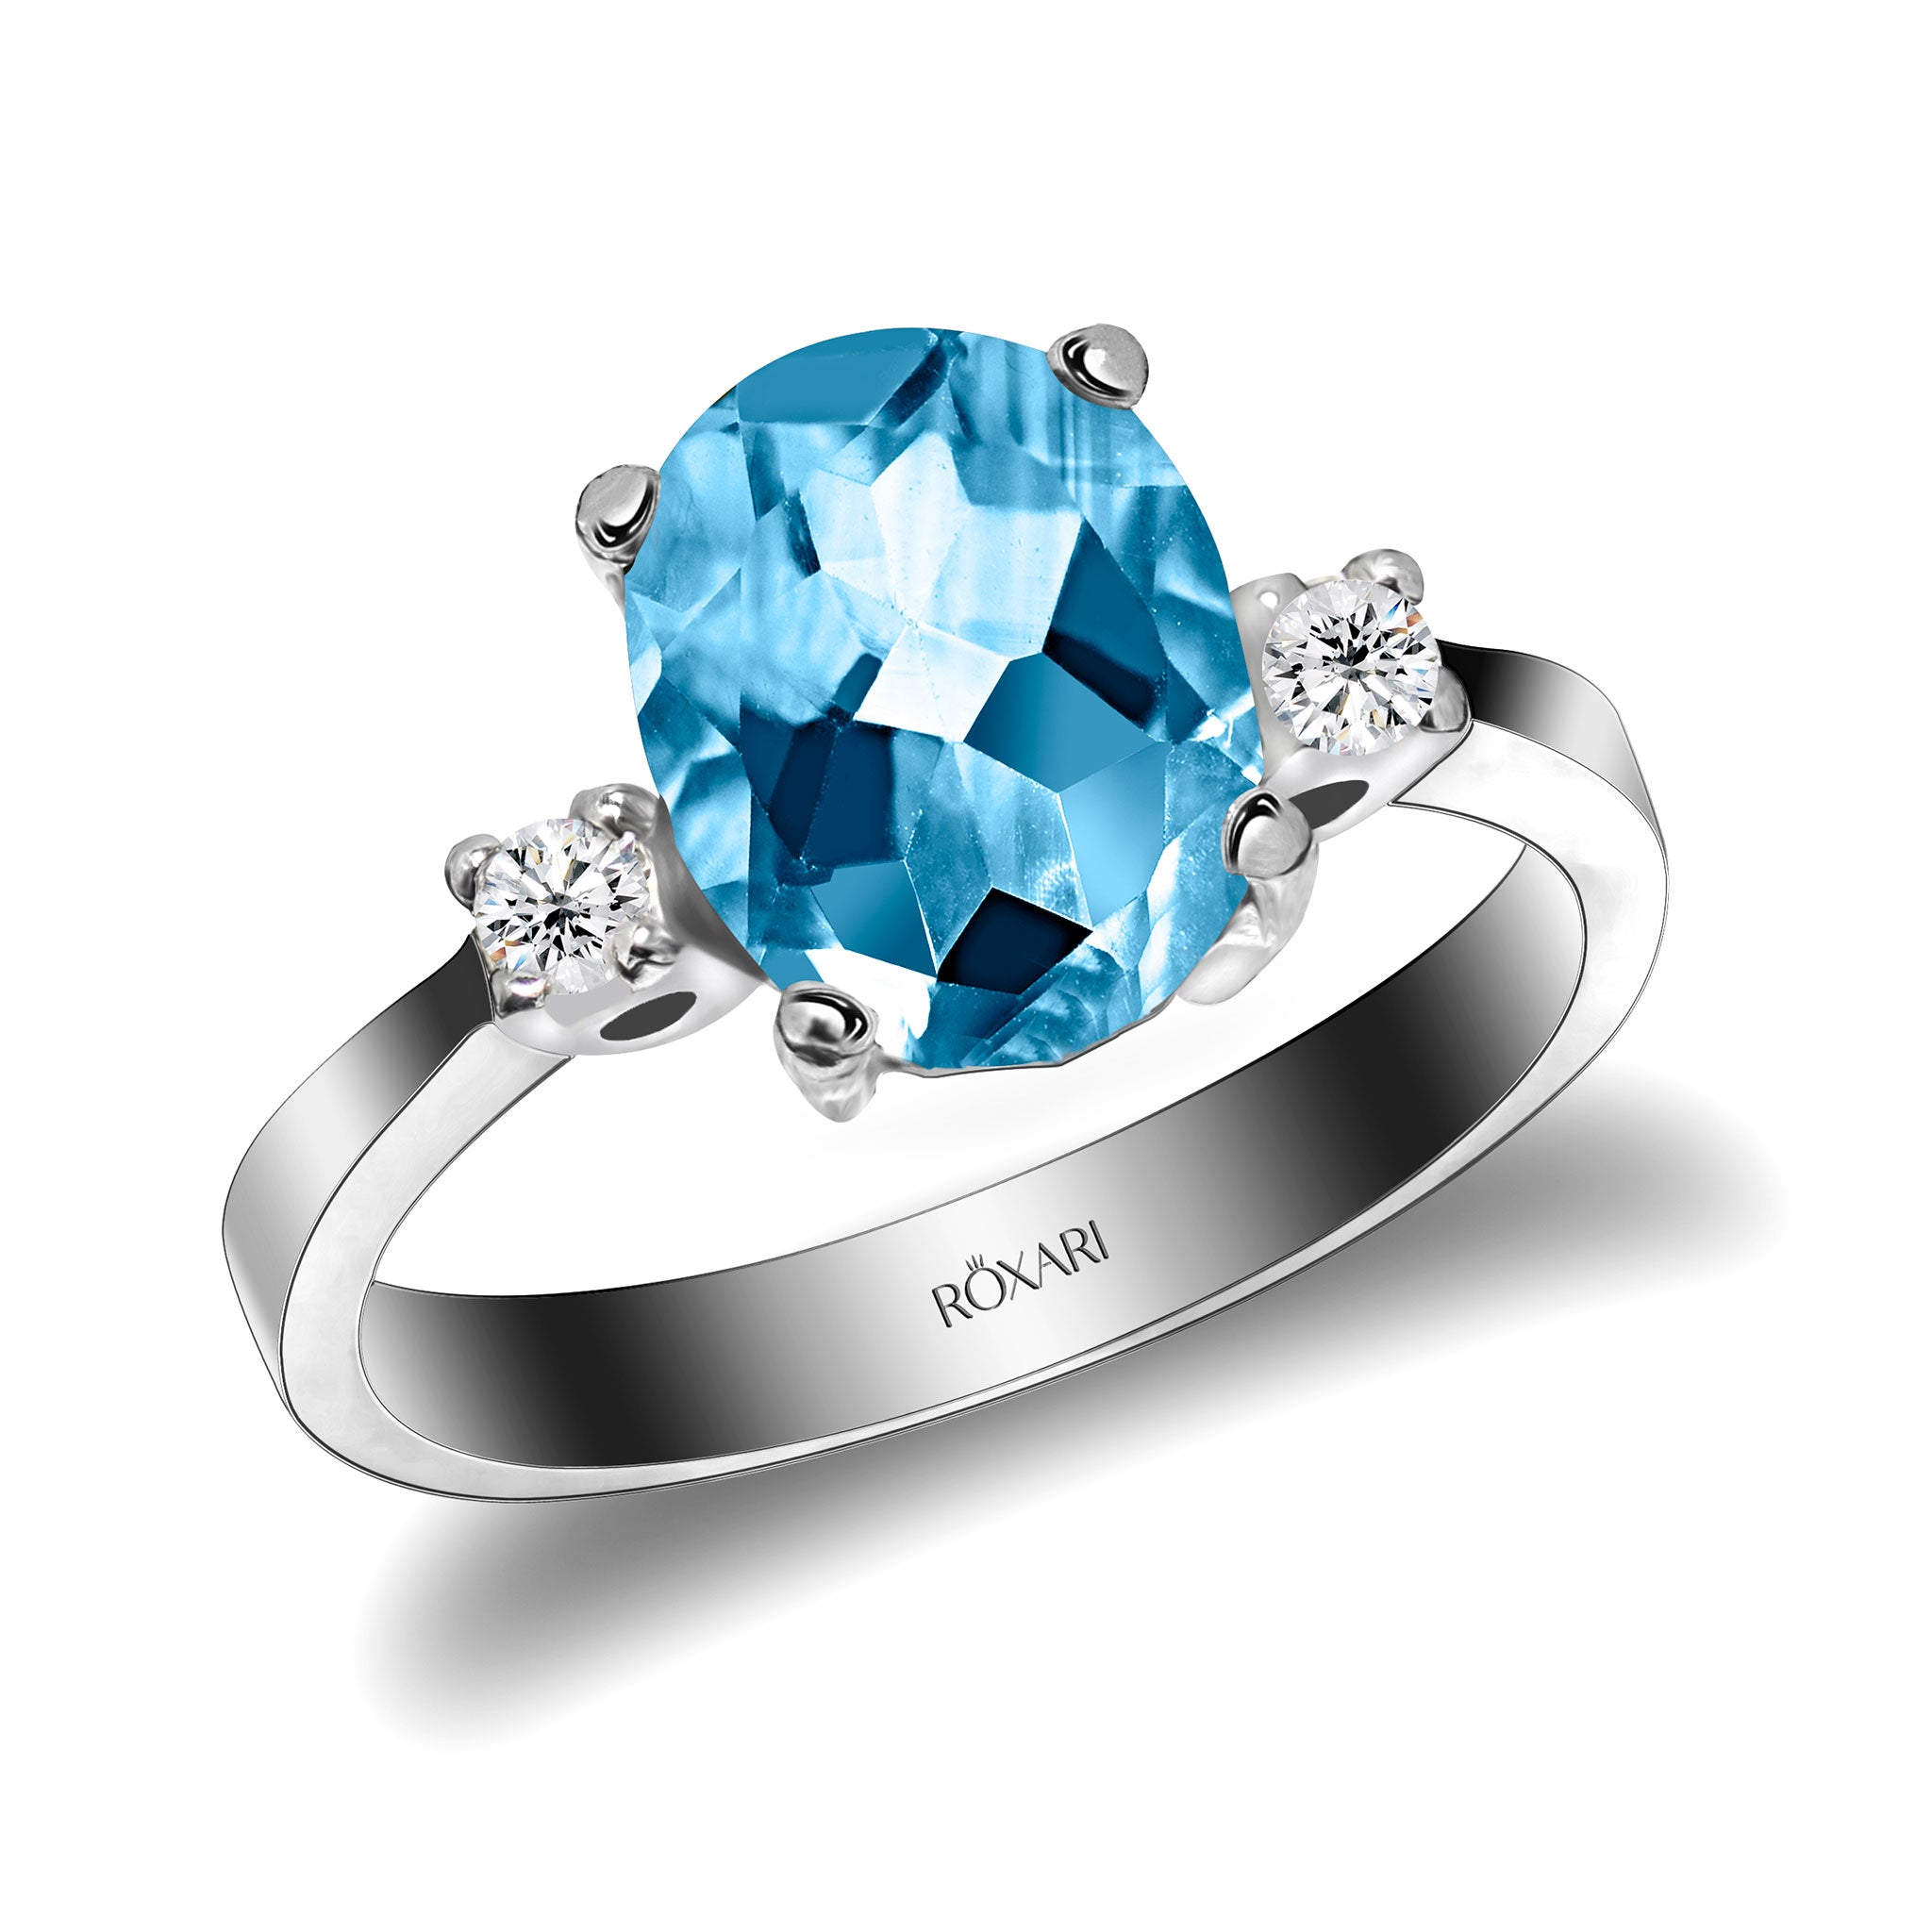 Guide for buying blue topaz rings | is topaz expensive?